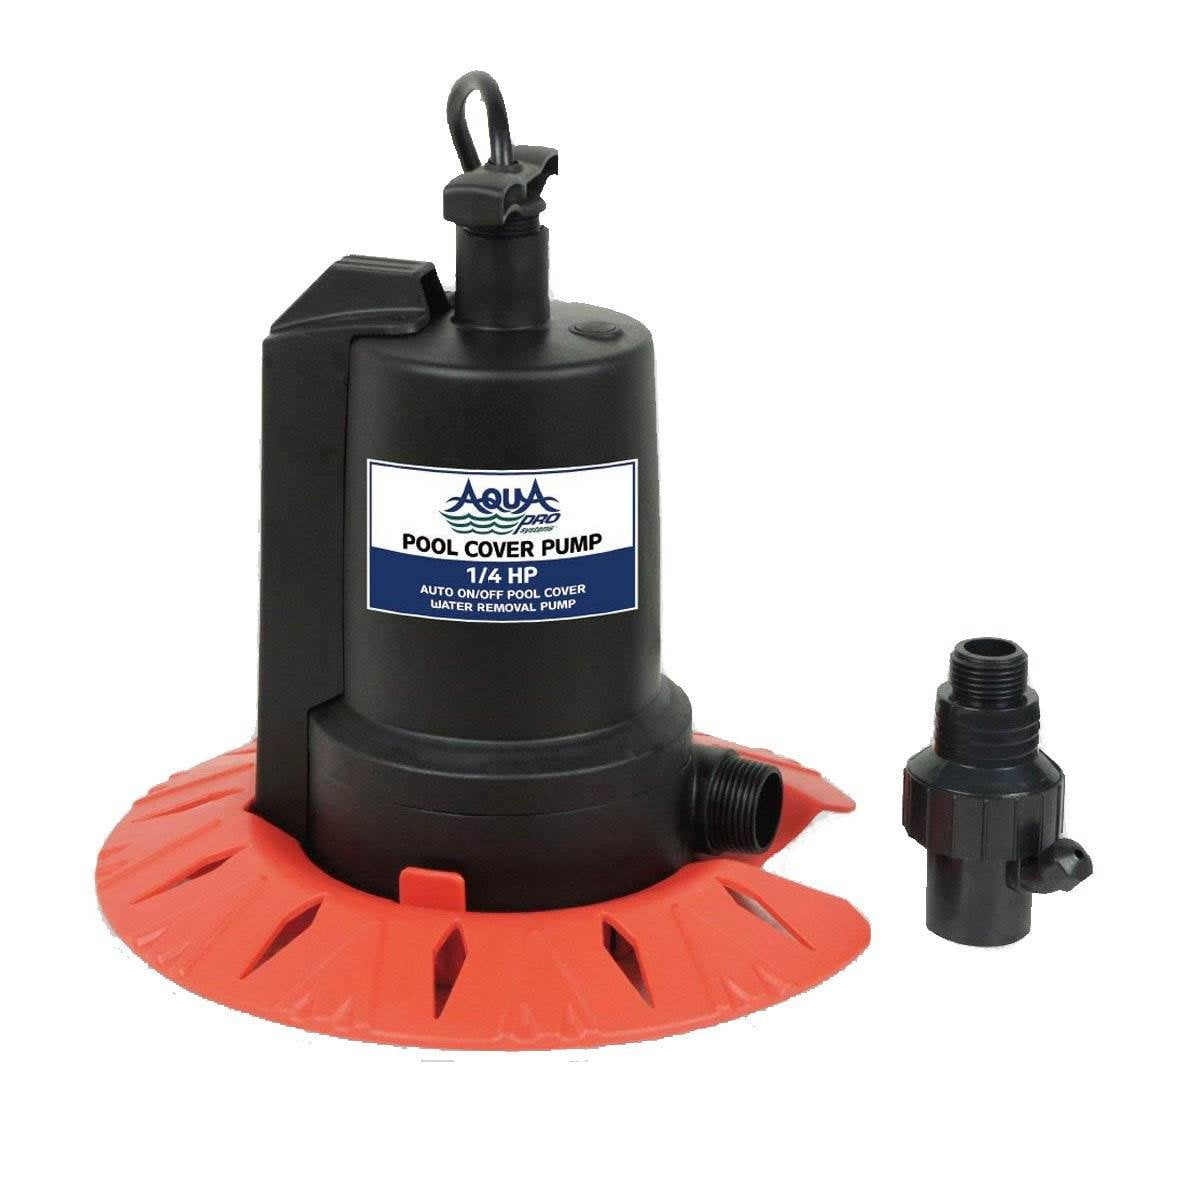 6 Hose Adapters 1100 GPH Submersible Water Pump with Adjustable Filter Automatic Swimming Pool Cover Pump Automatic Overheating Protection Wide Usage Range 